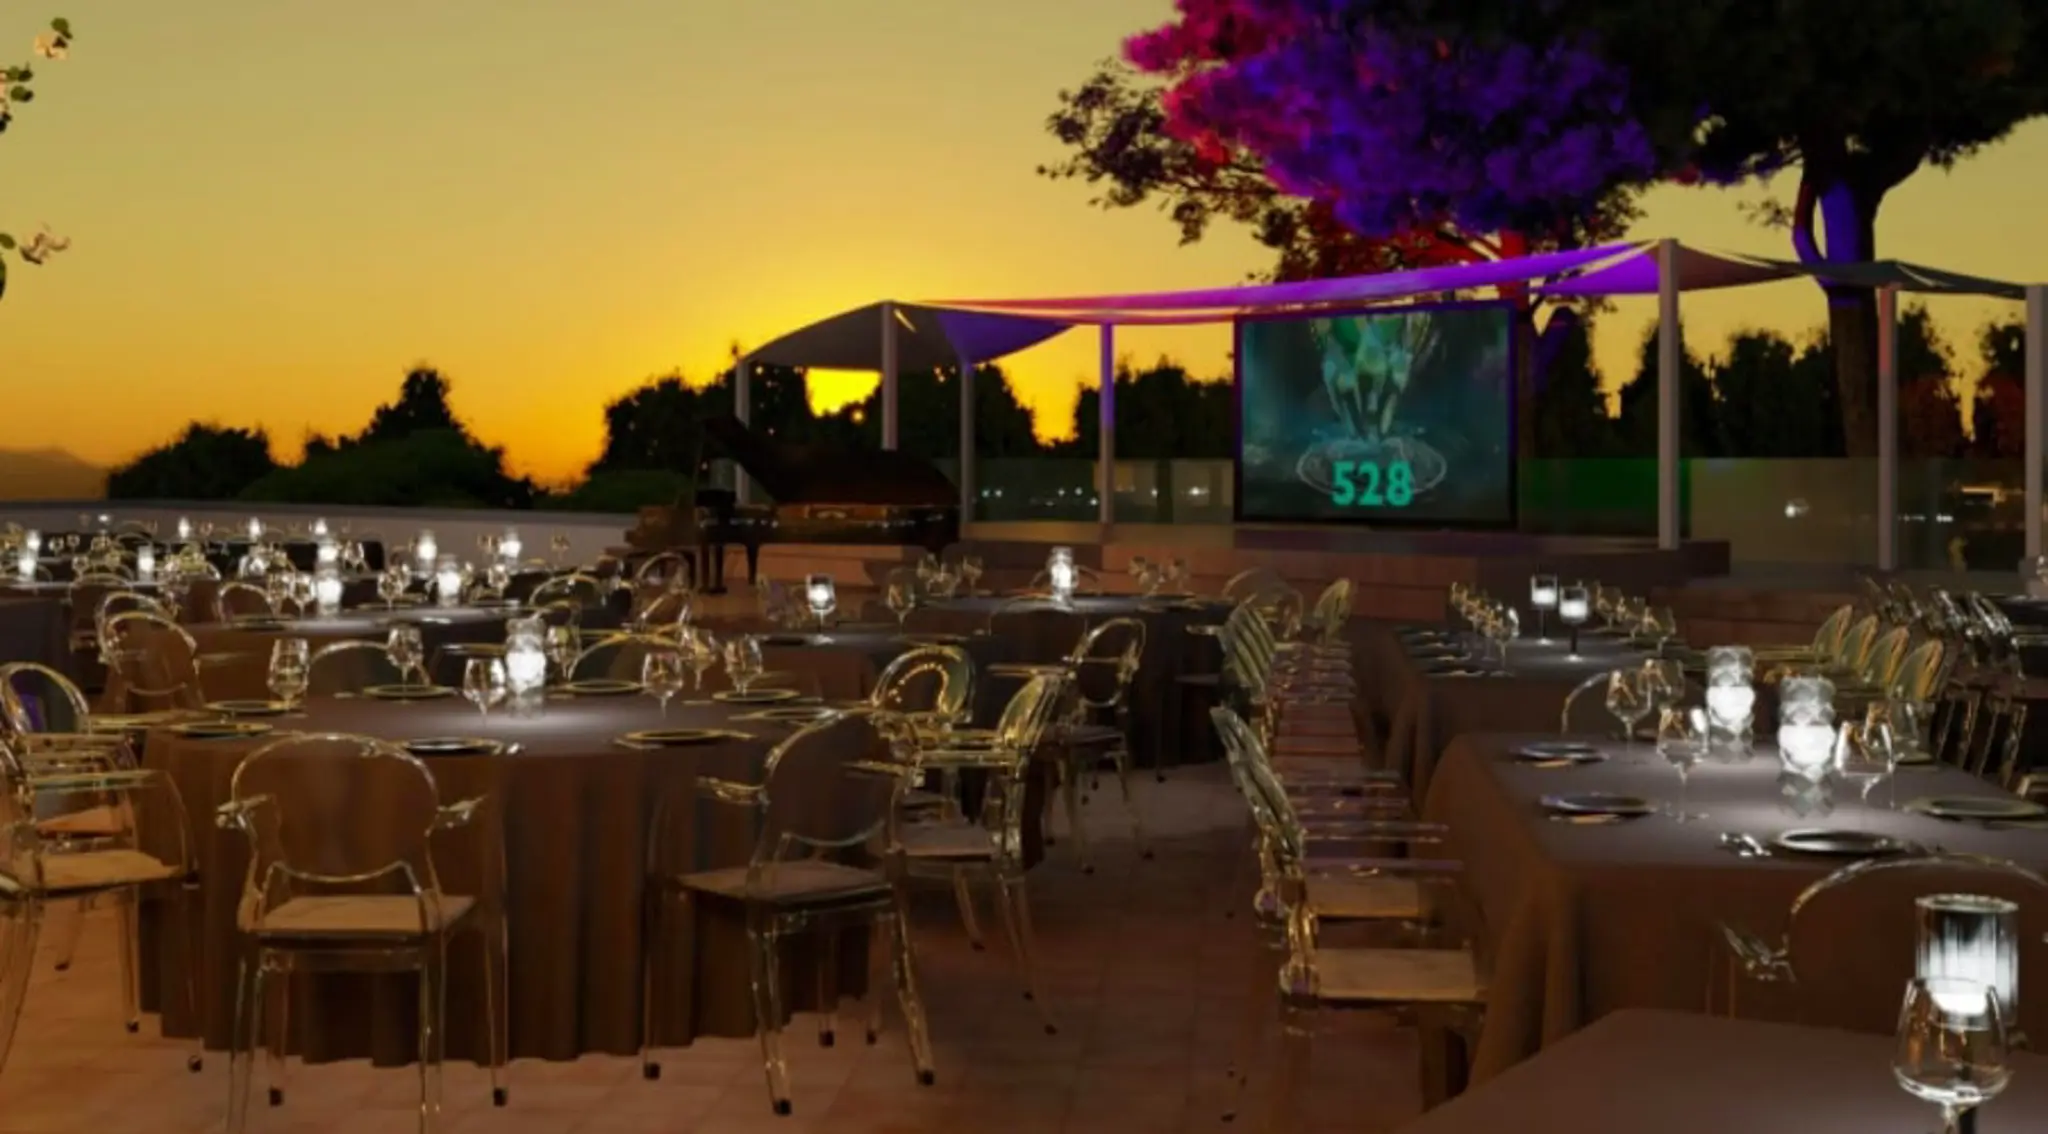 Movies by Starlight – Outdoor Cinema in Ibiza